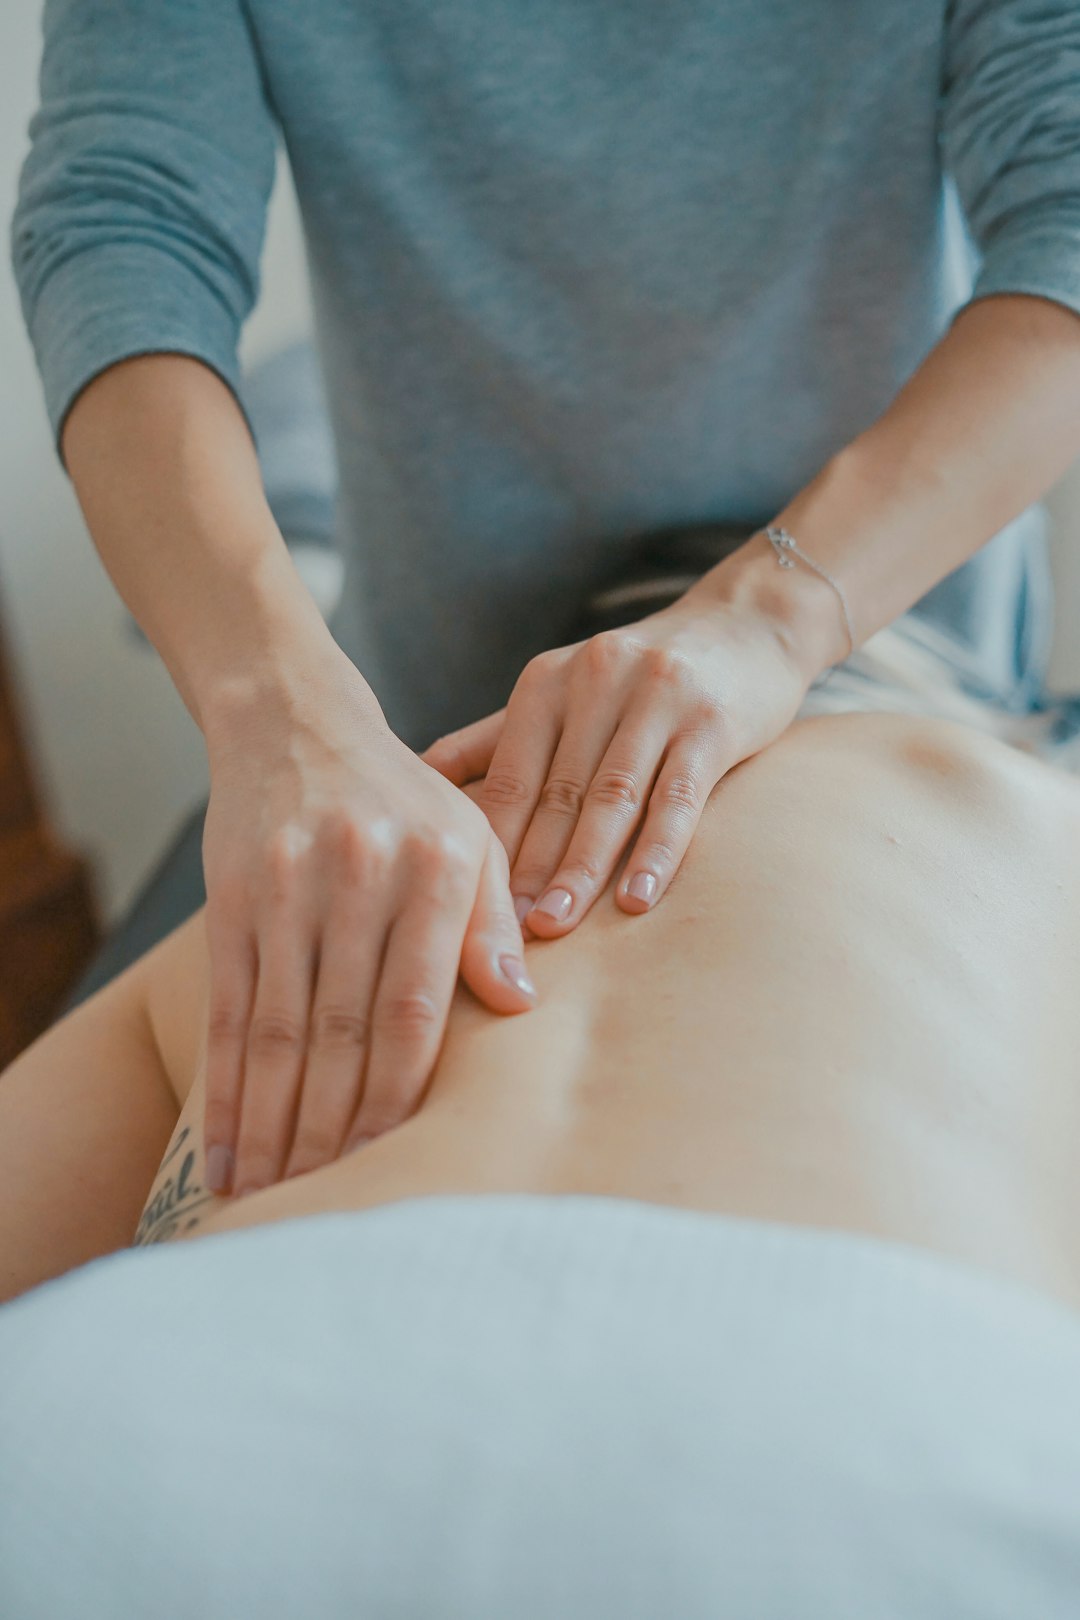 How to Choose the Best Chiropractor: Everything You Need to Know